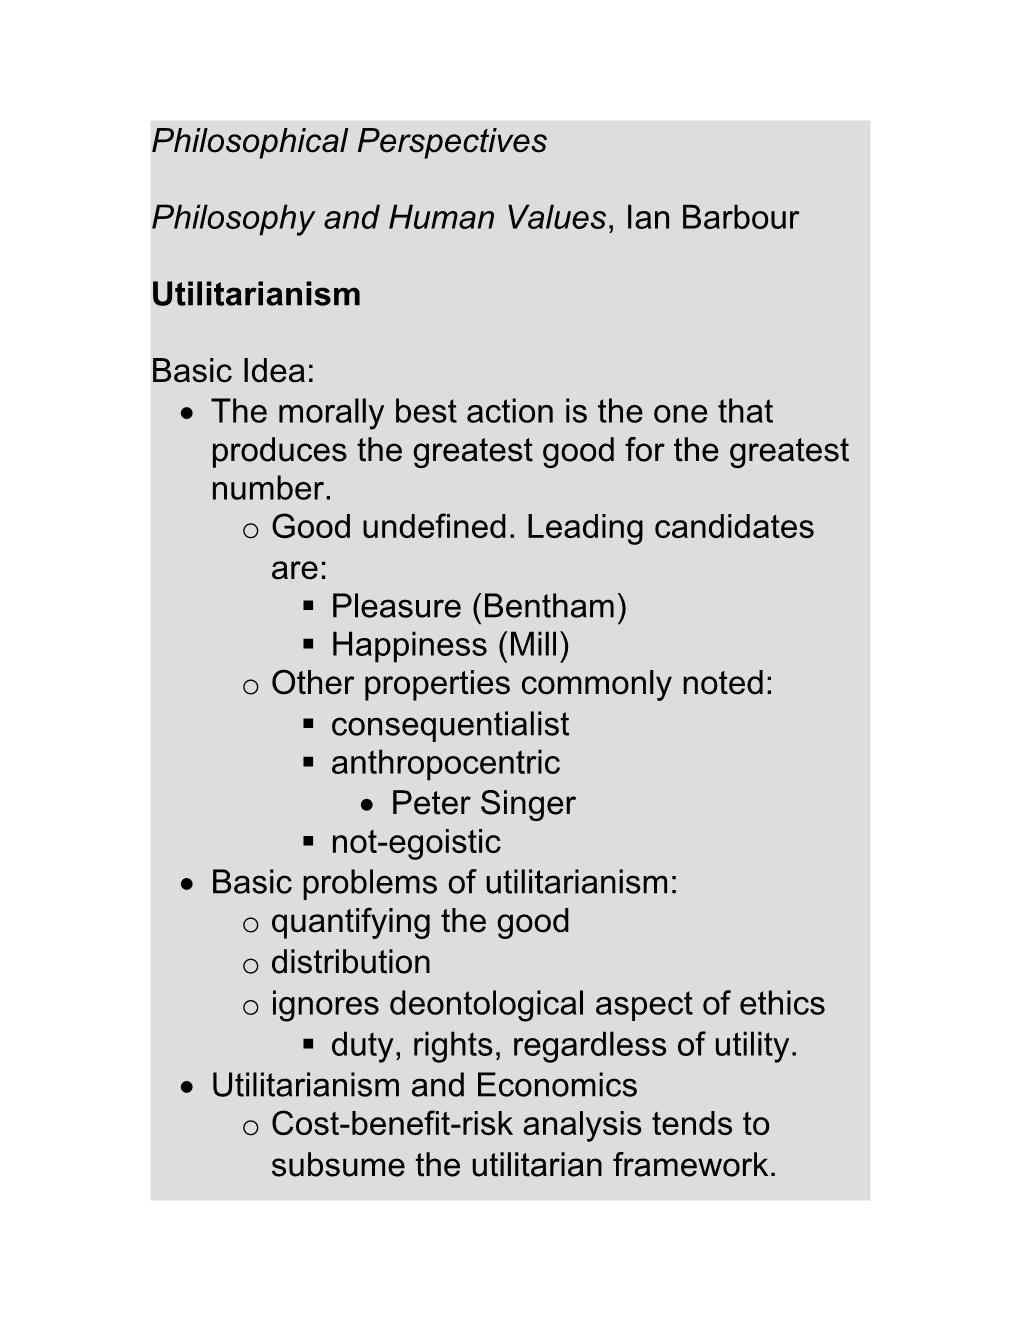 Philosophy and Human Values, Ian Barbour